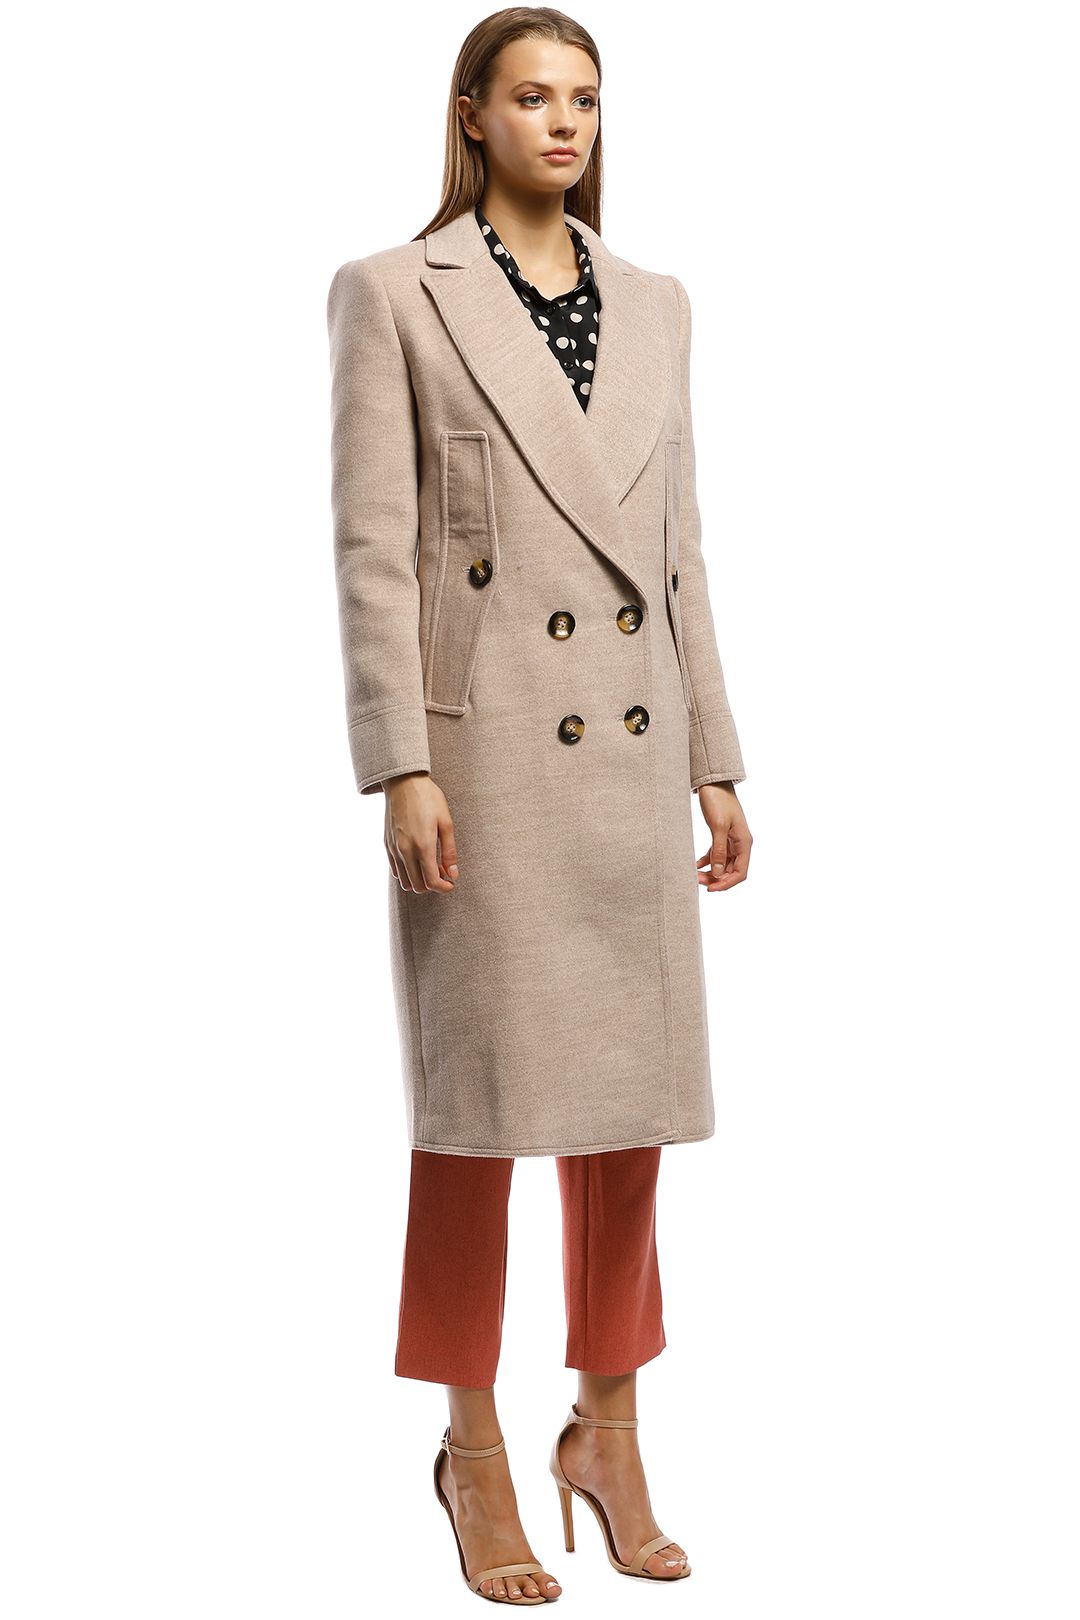 CMEO Collective - Held Up Coat - Brown - Back